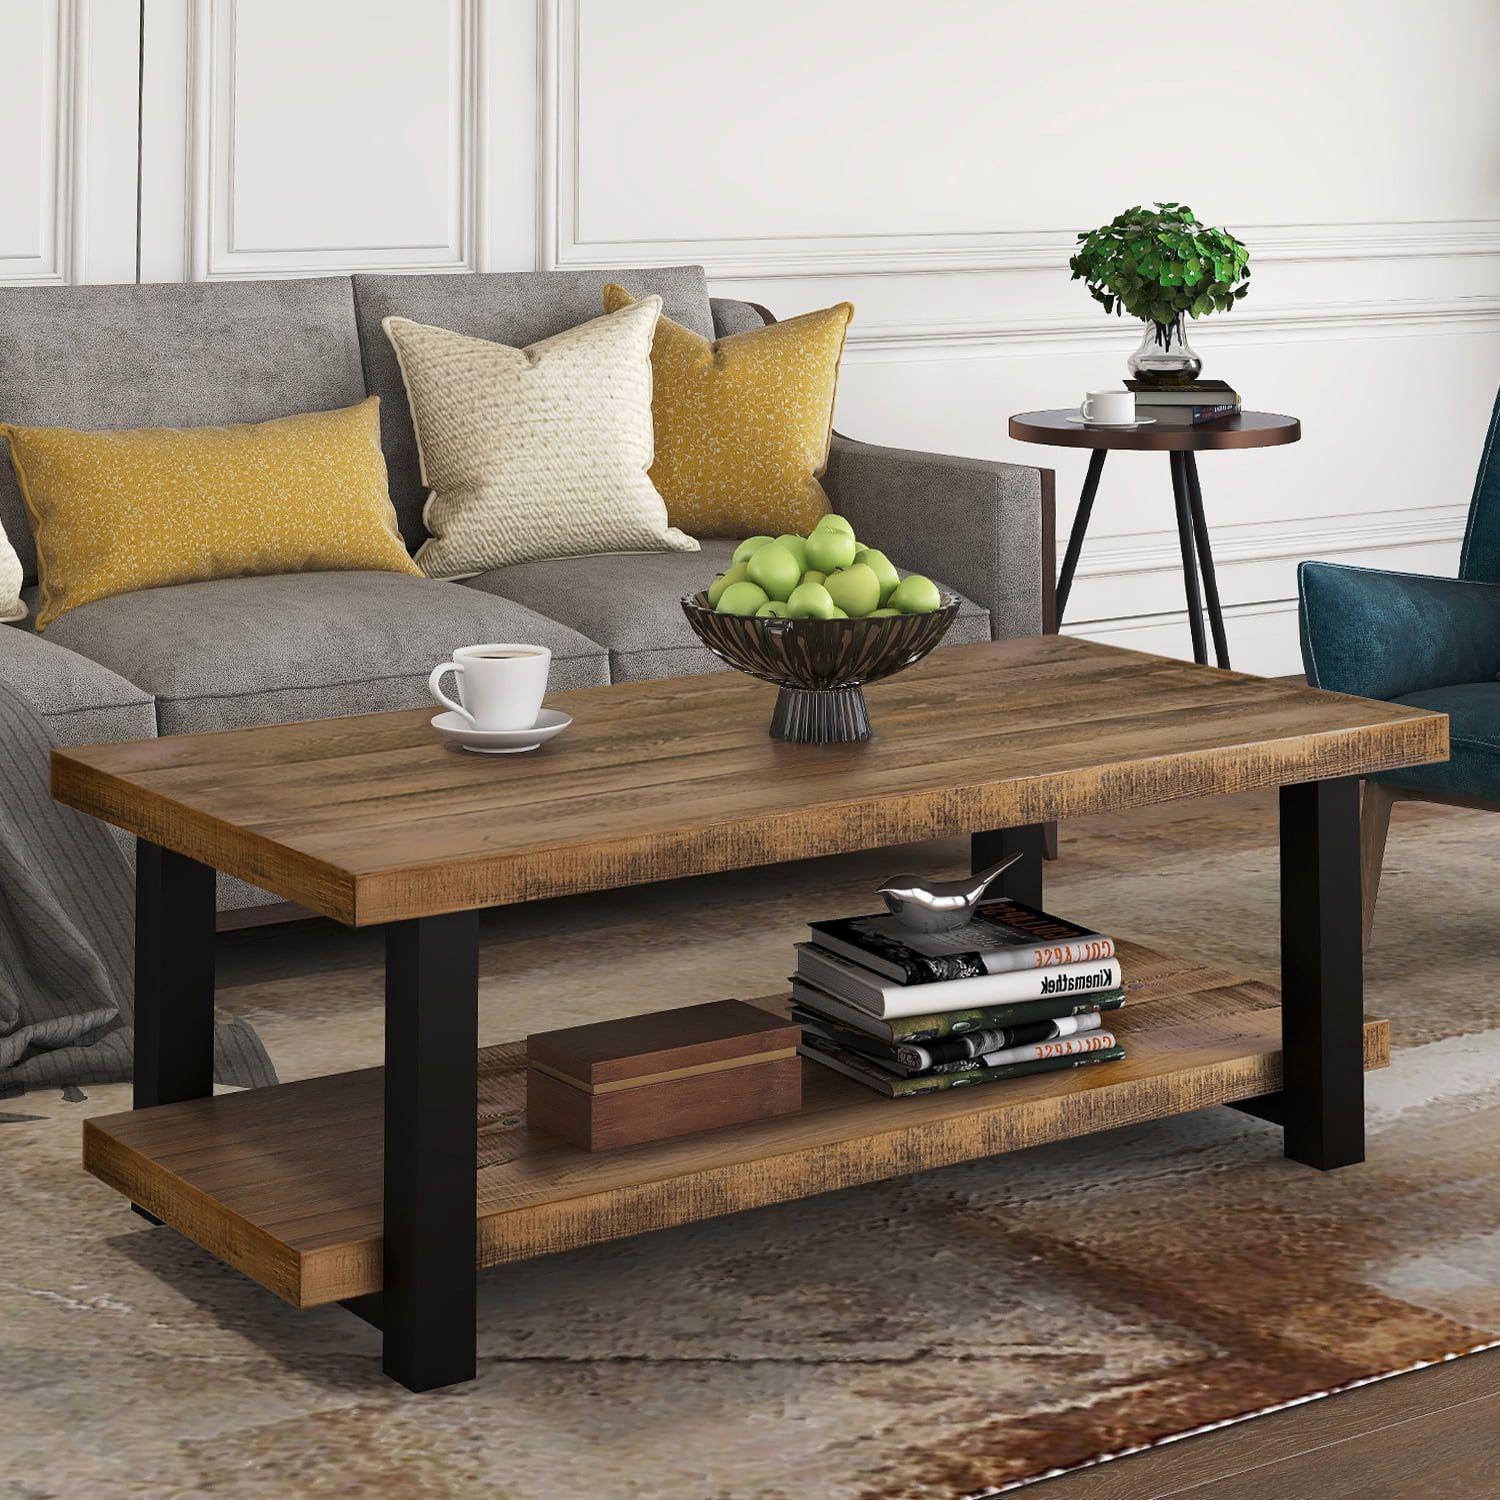 Topcobe Rustic Natural Coffee Table With Storage Shelf, Side End Table With Regard To Coffee Tables With Storage And Barn Doors (Gallery 17 of 20)